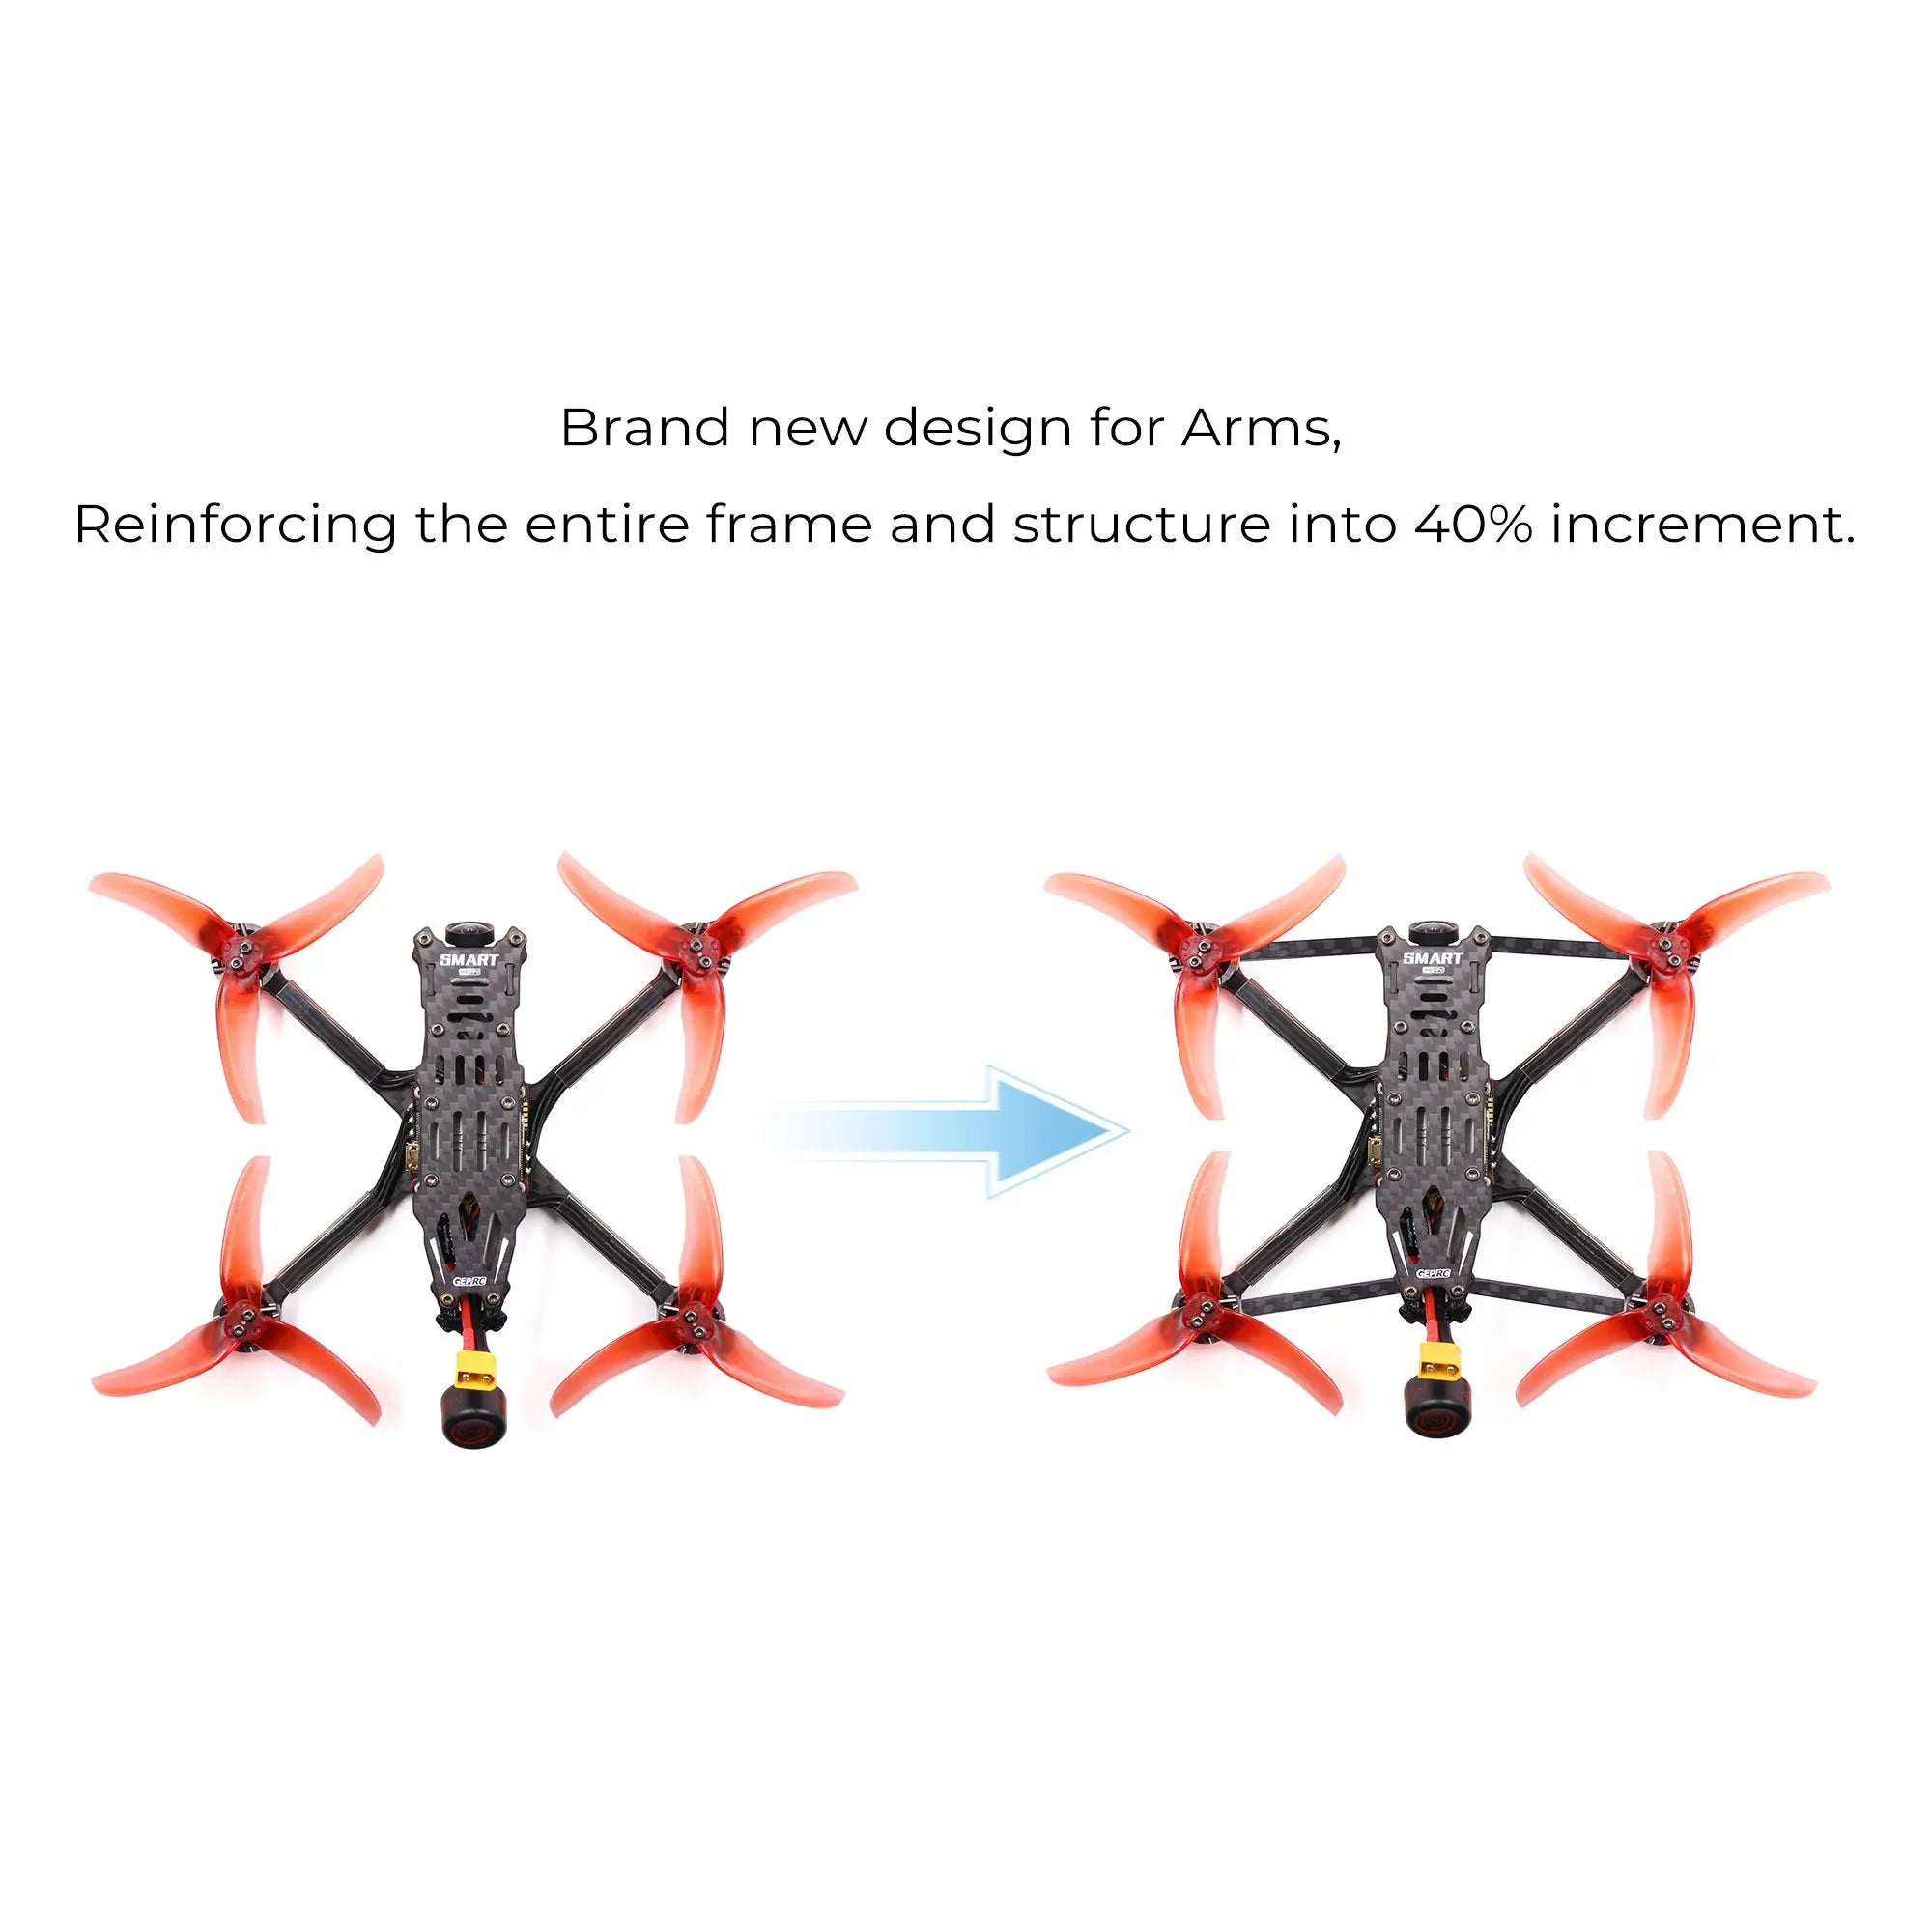 GEPRC SMART 35 FPV Drone, Brand new design for Arms, Reinforcing the entire frame and structure into 4O